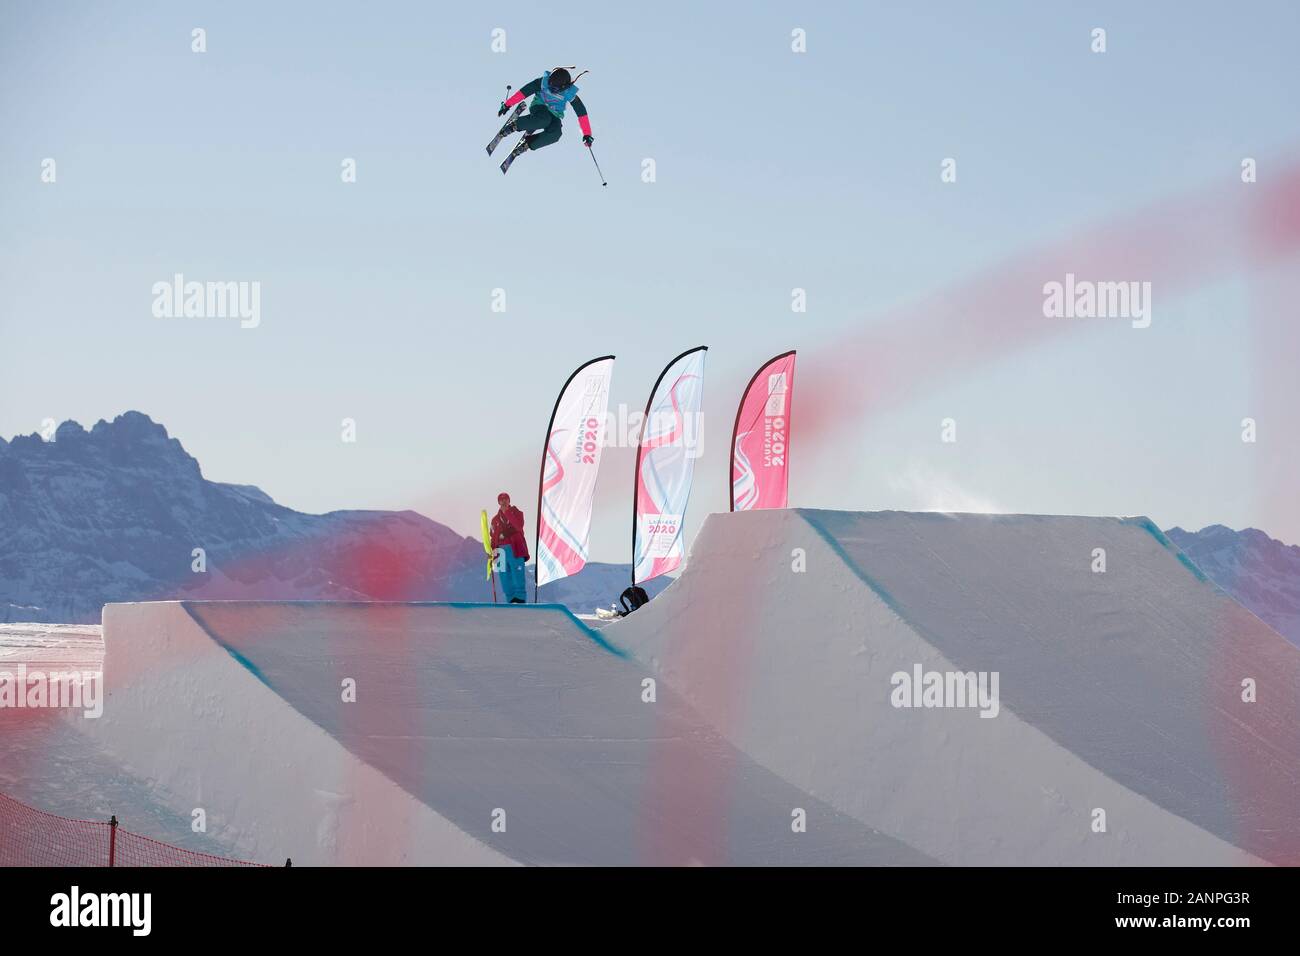 Team GB’s Kirsty Muir (15) during freeski slopestyle training at the Lausanne 2020 Youth Olympic Games on the 16h January 2020 at Leysin Park & Pipe Stock Photo